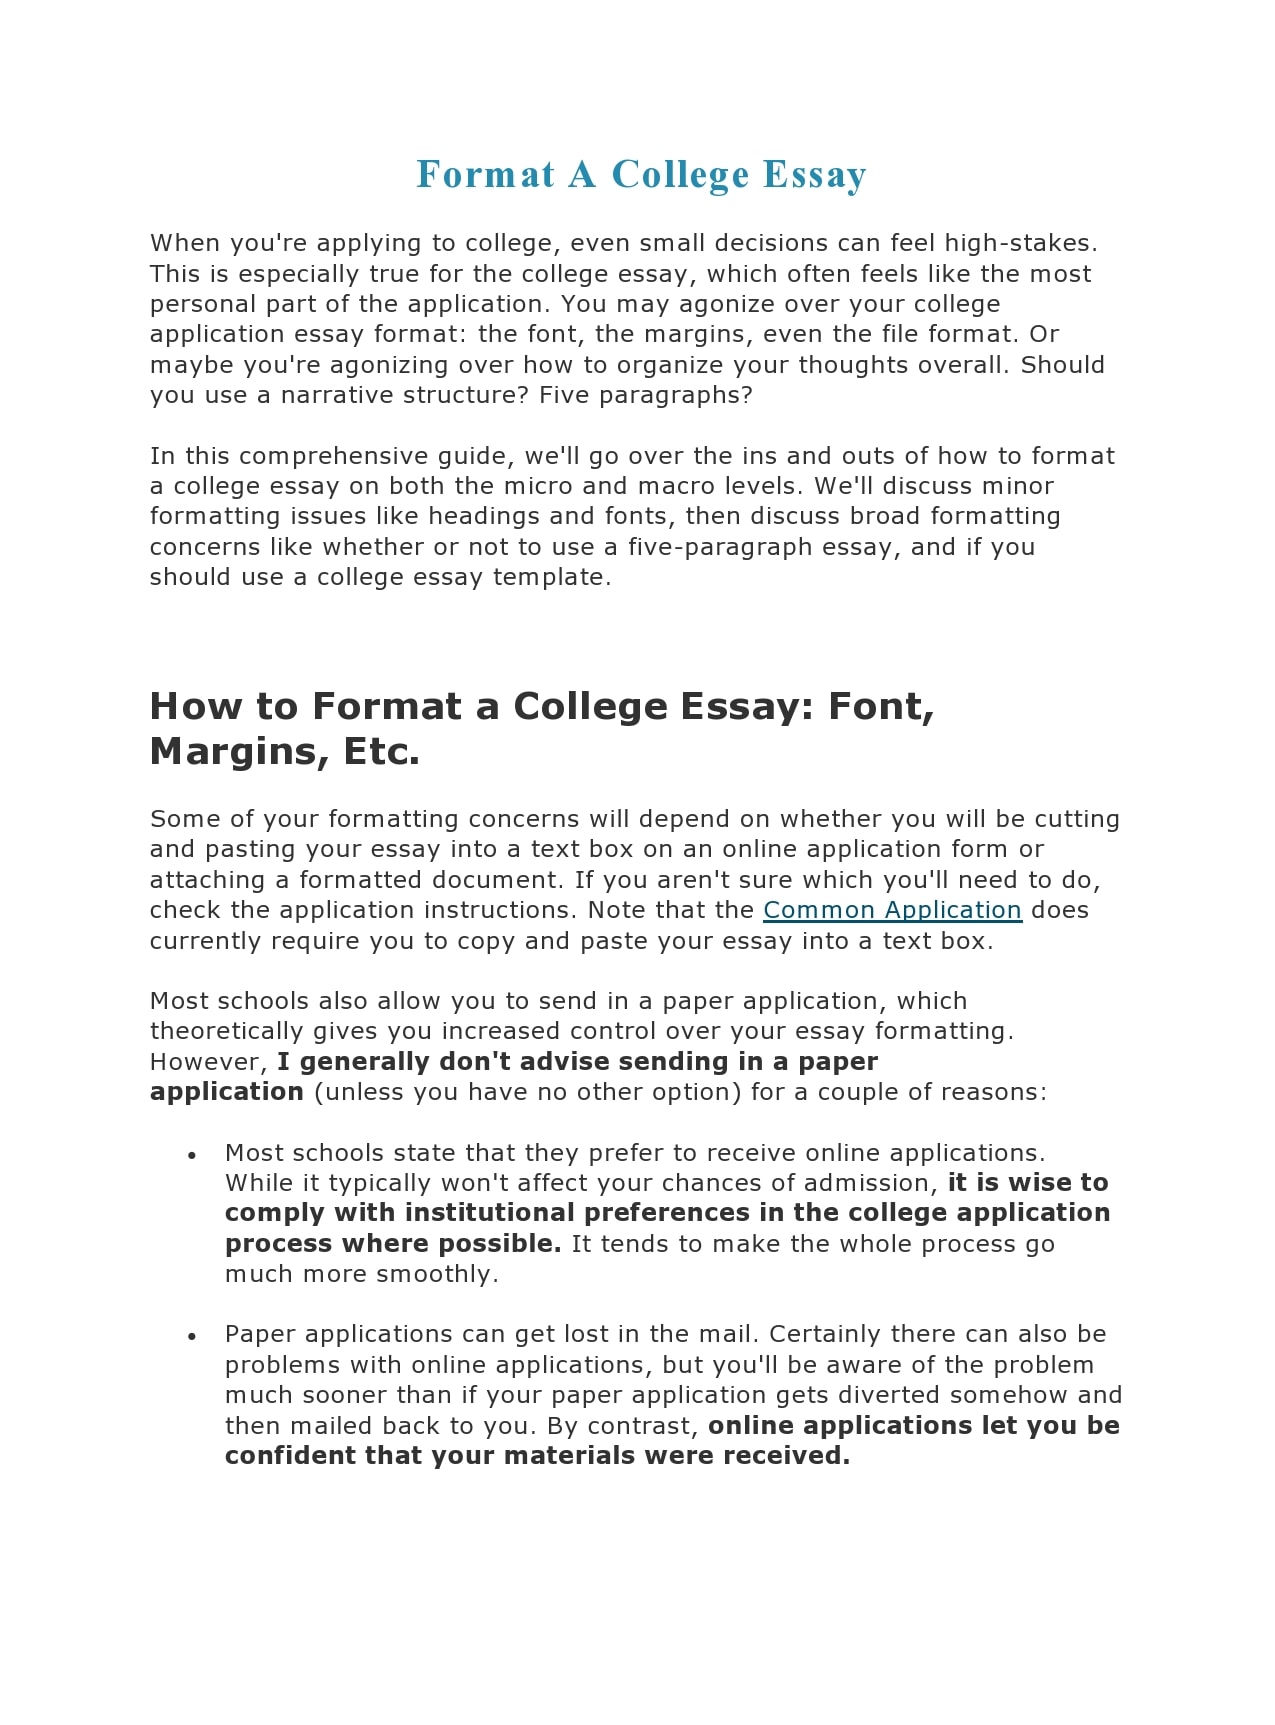 what's the format for a college essay